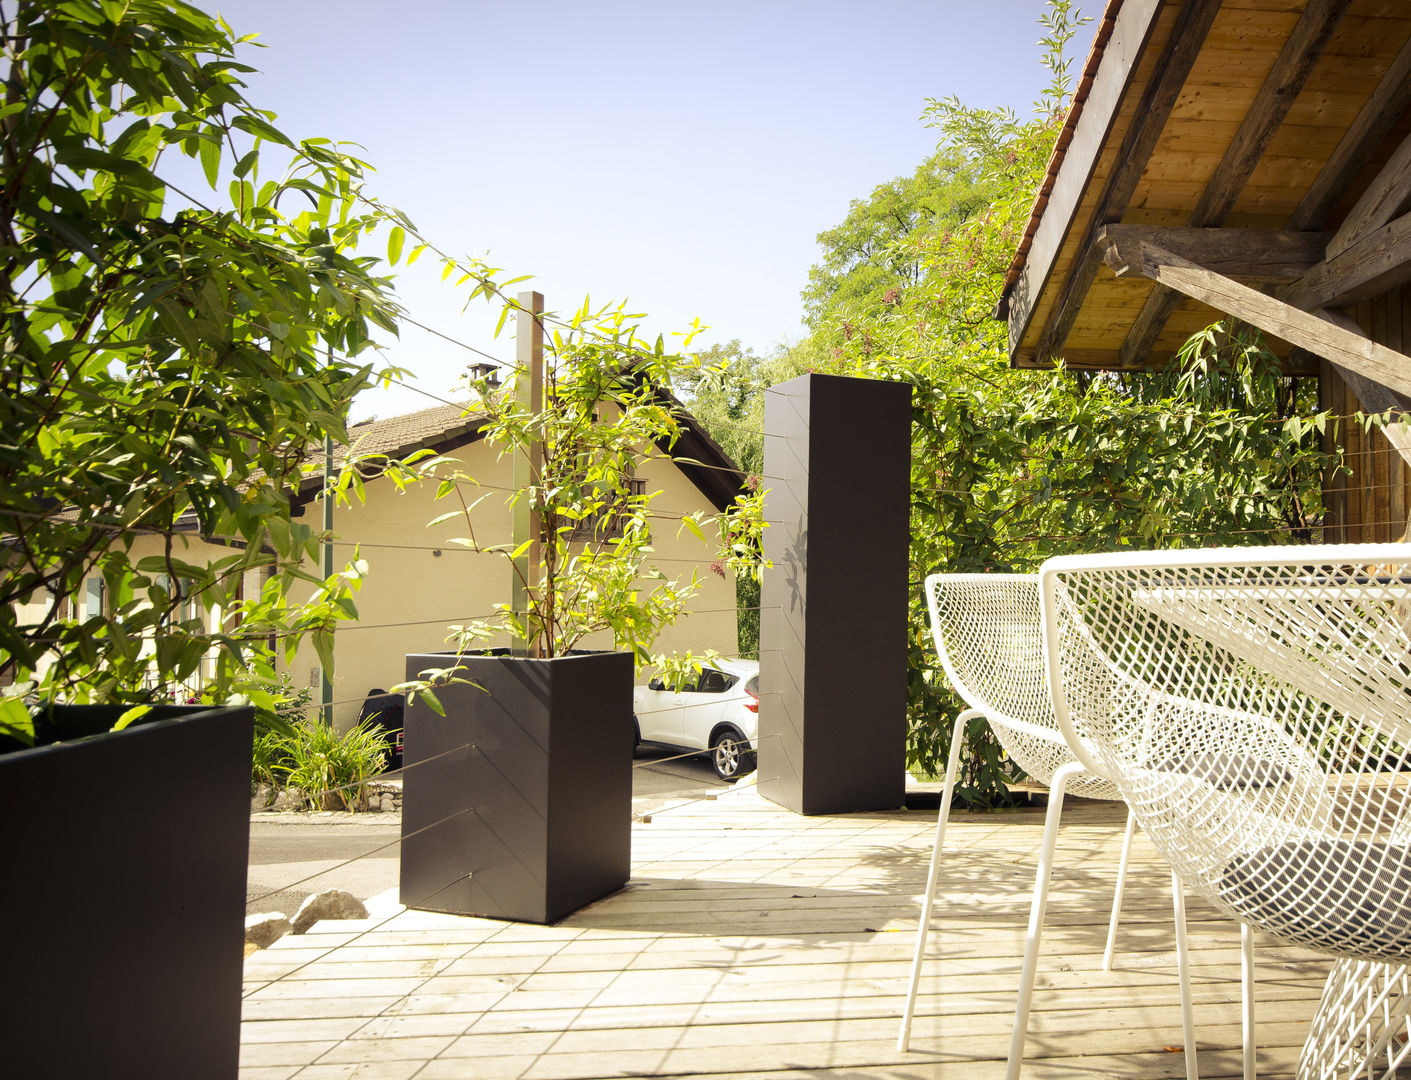 Custom planters Image'In - Combination of Black and White forms for climbing plants., ATELIER SO GREEN ATELIER SO GREEN Giardino eclettico